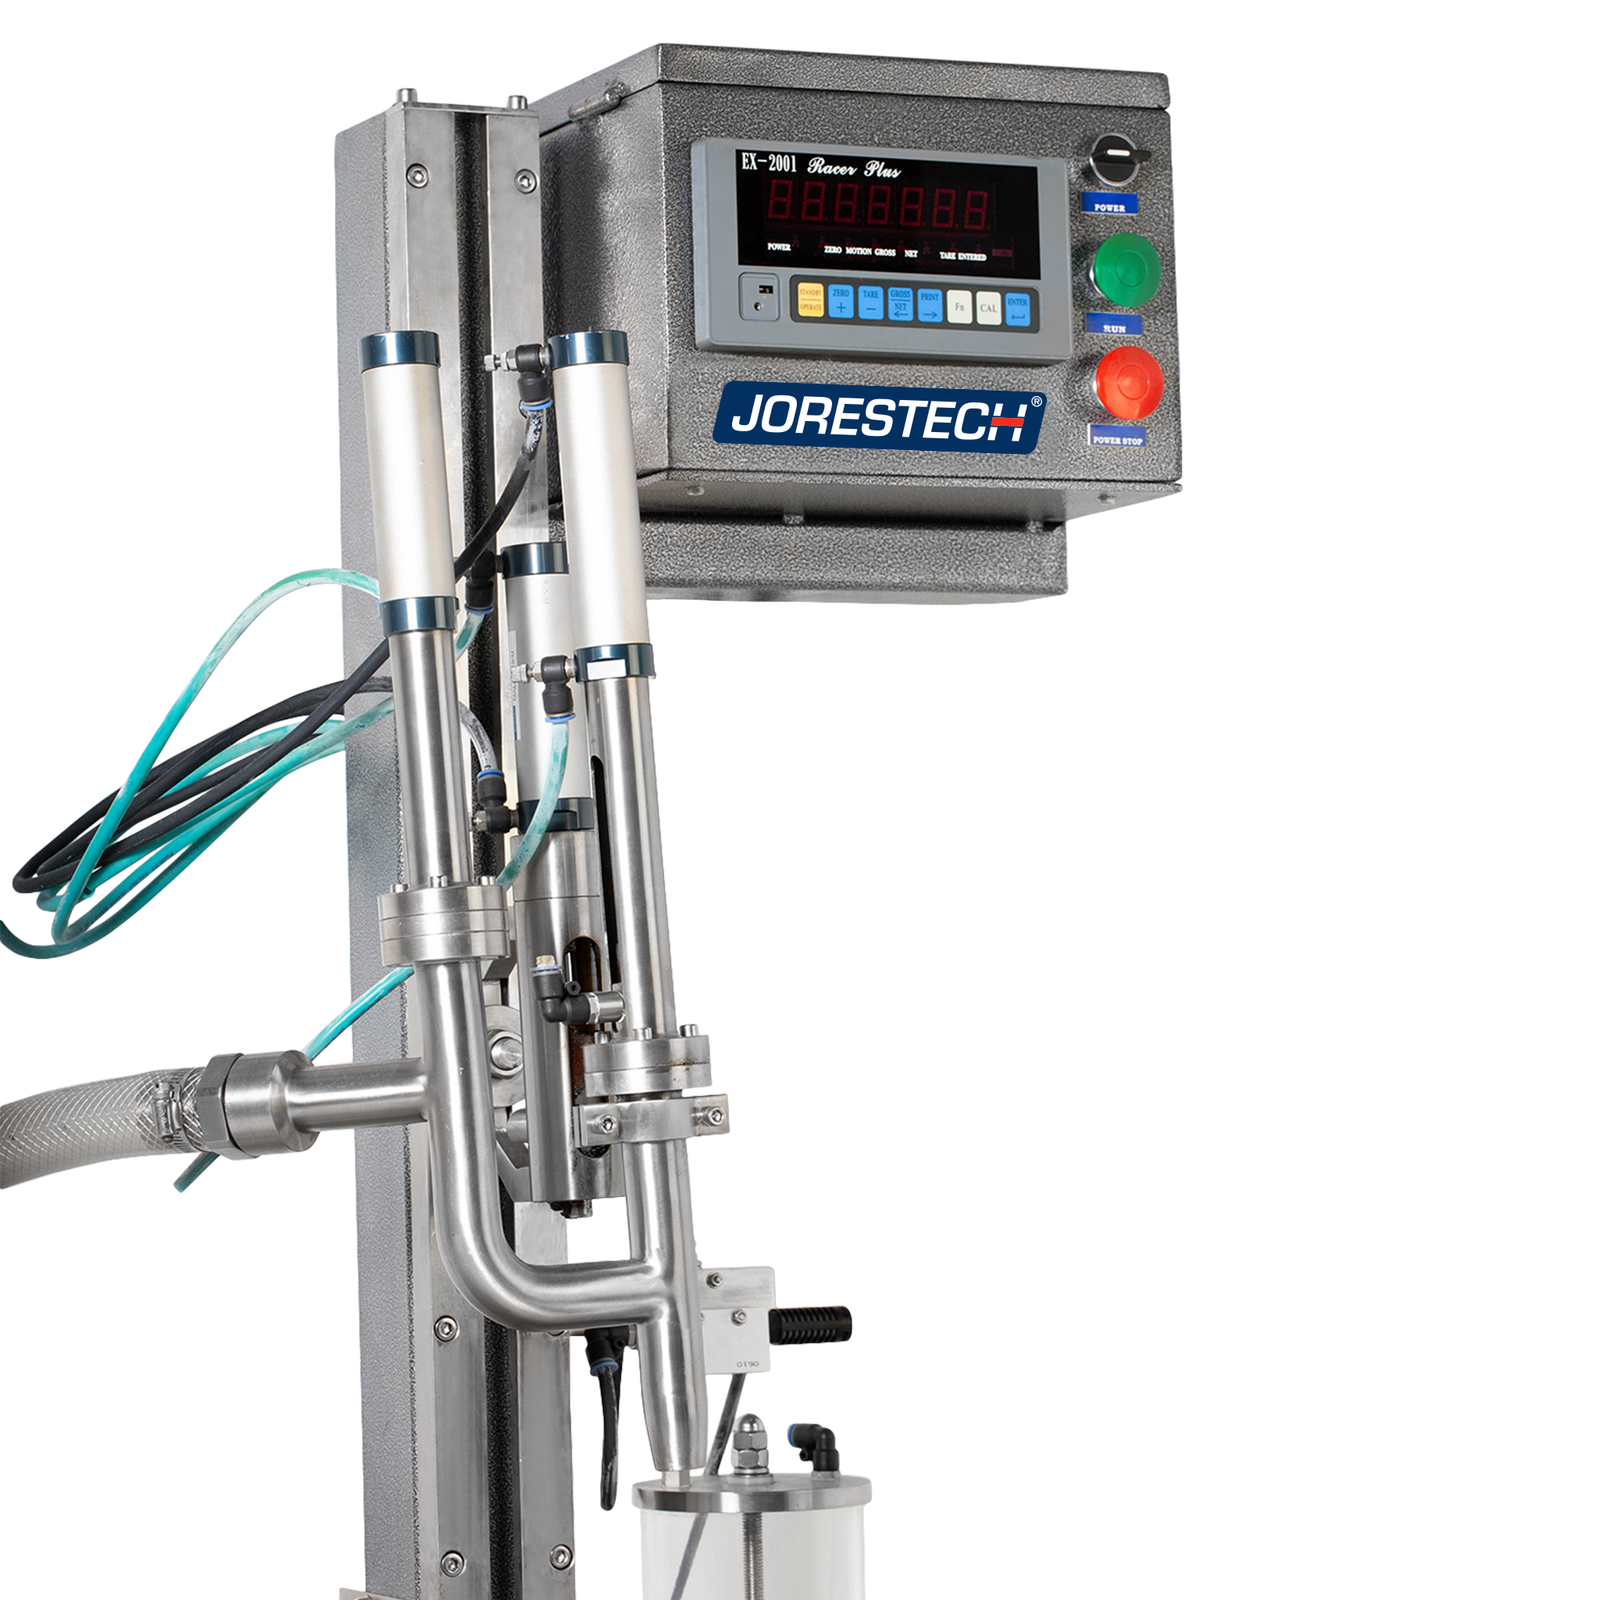 Closeup shows the digital control panel, the height adjustment vertical tower, compressed air hose system, and the liquid dispensing nozzle of the JORES TECHNOLOGIES® liquid net weight filler.